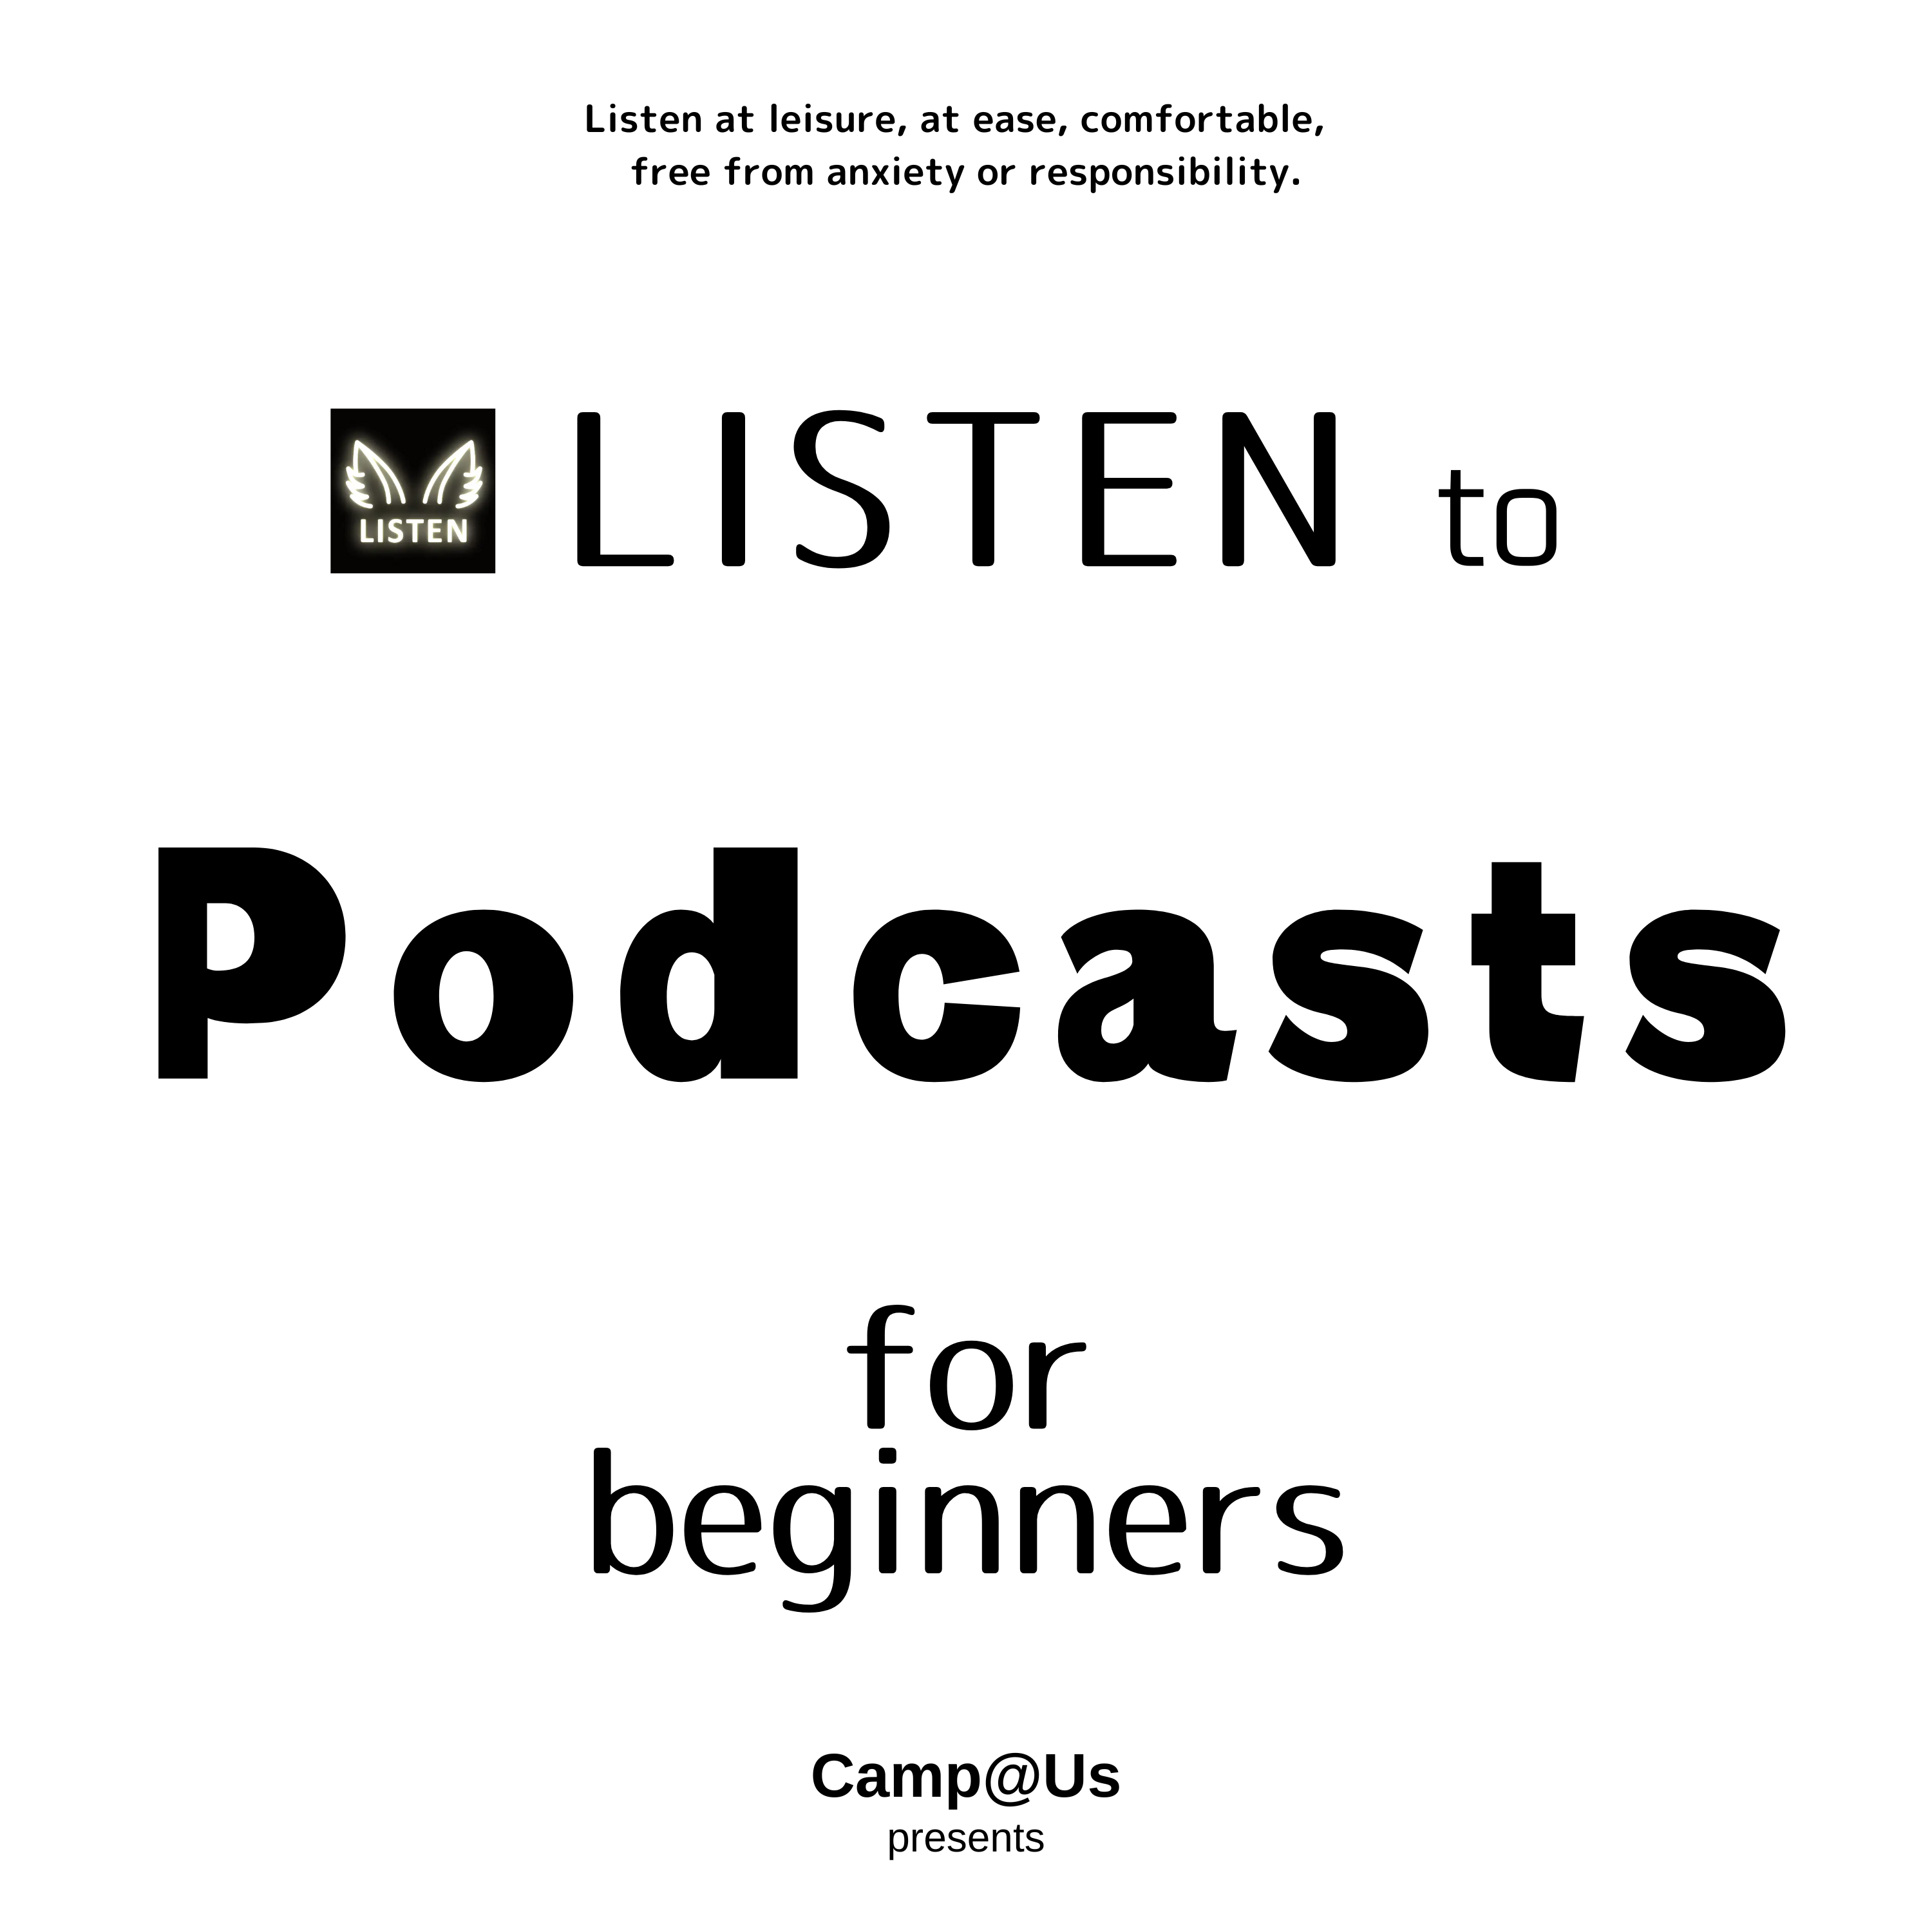 #1 LISTEN to Podcasts! for Beginners /presented by はじめるradioキャンパス